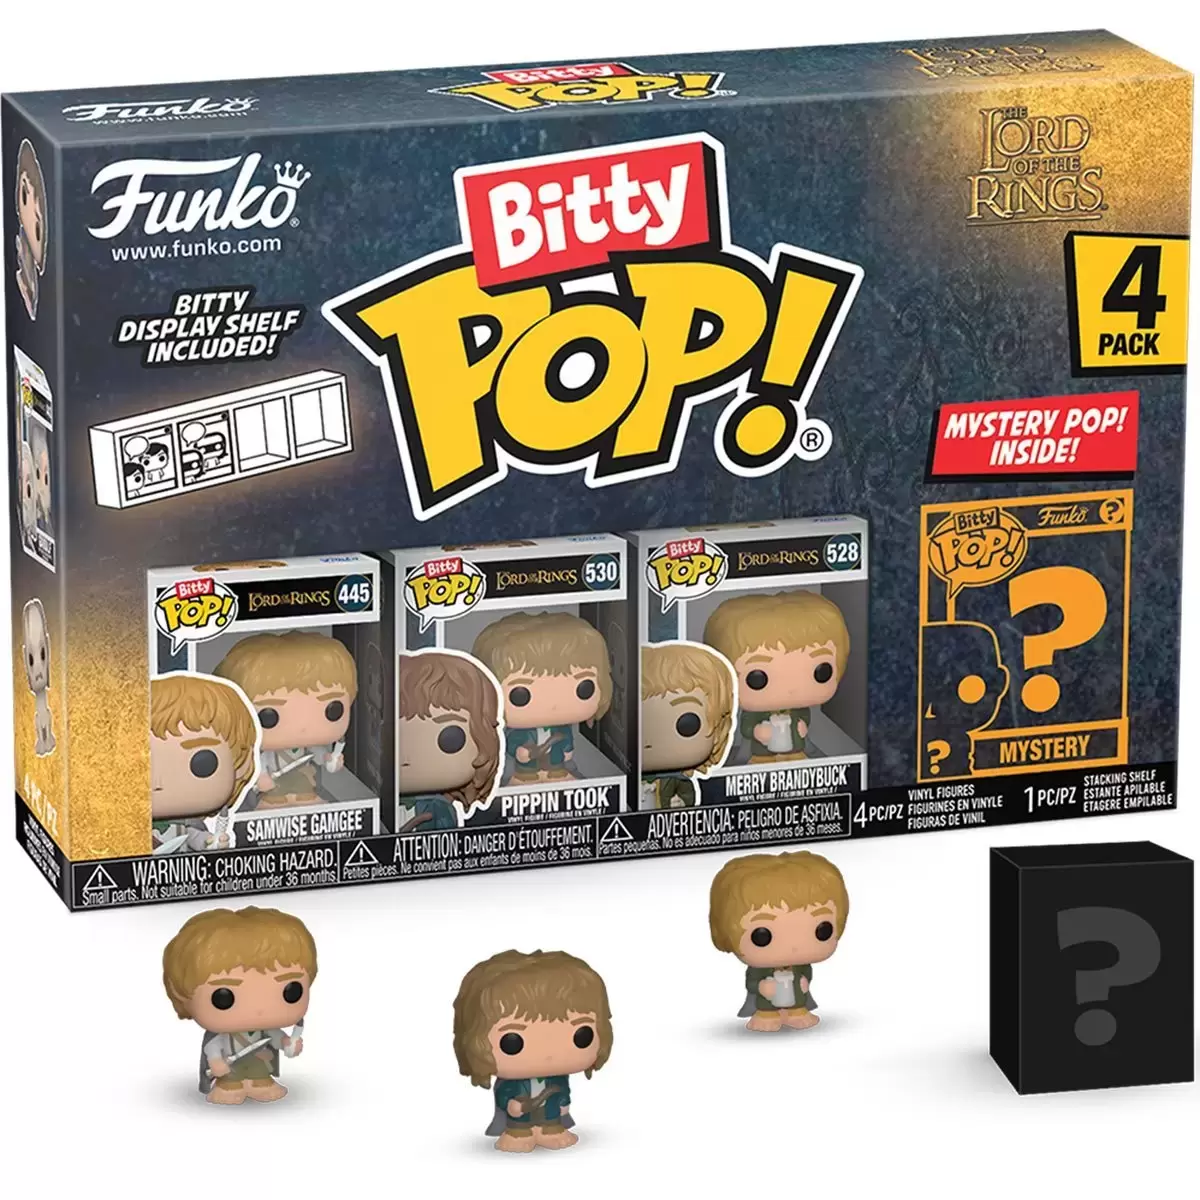 Bitty POP! - Lord of The Rings - Samwise Gamgee, Pippin Took, Merry Brandybuck  & Mystery